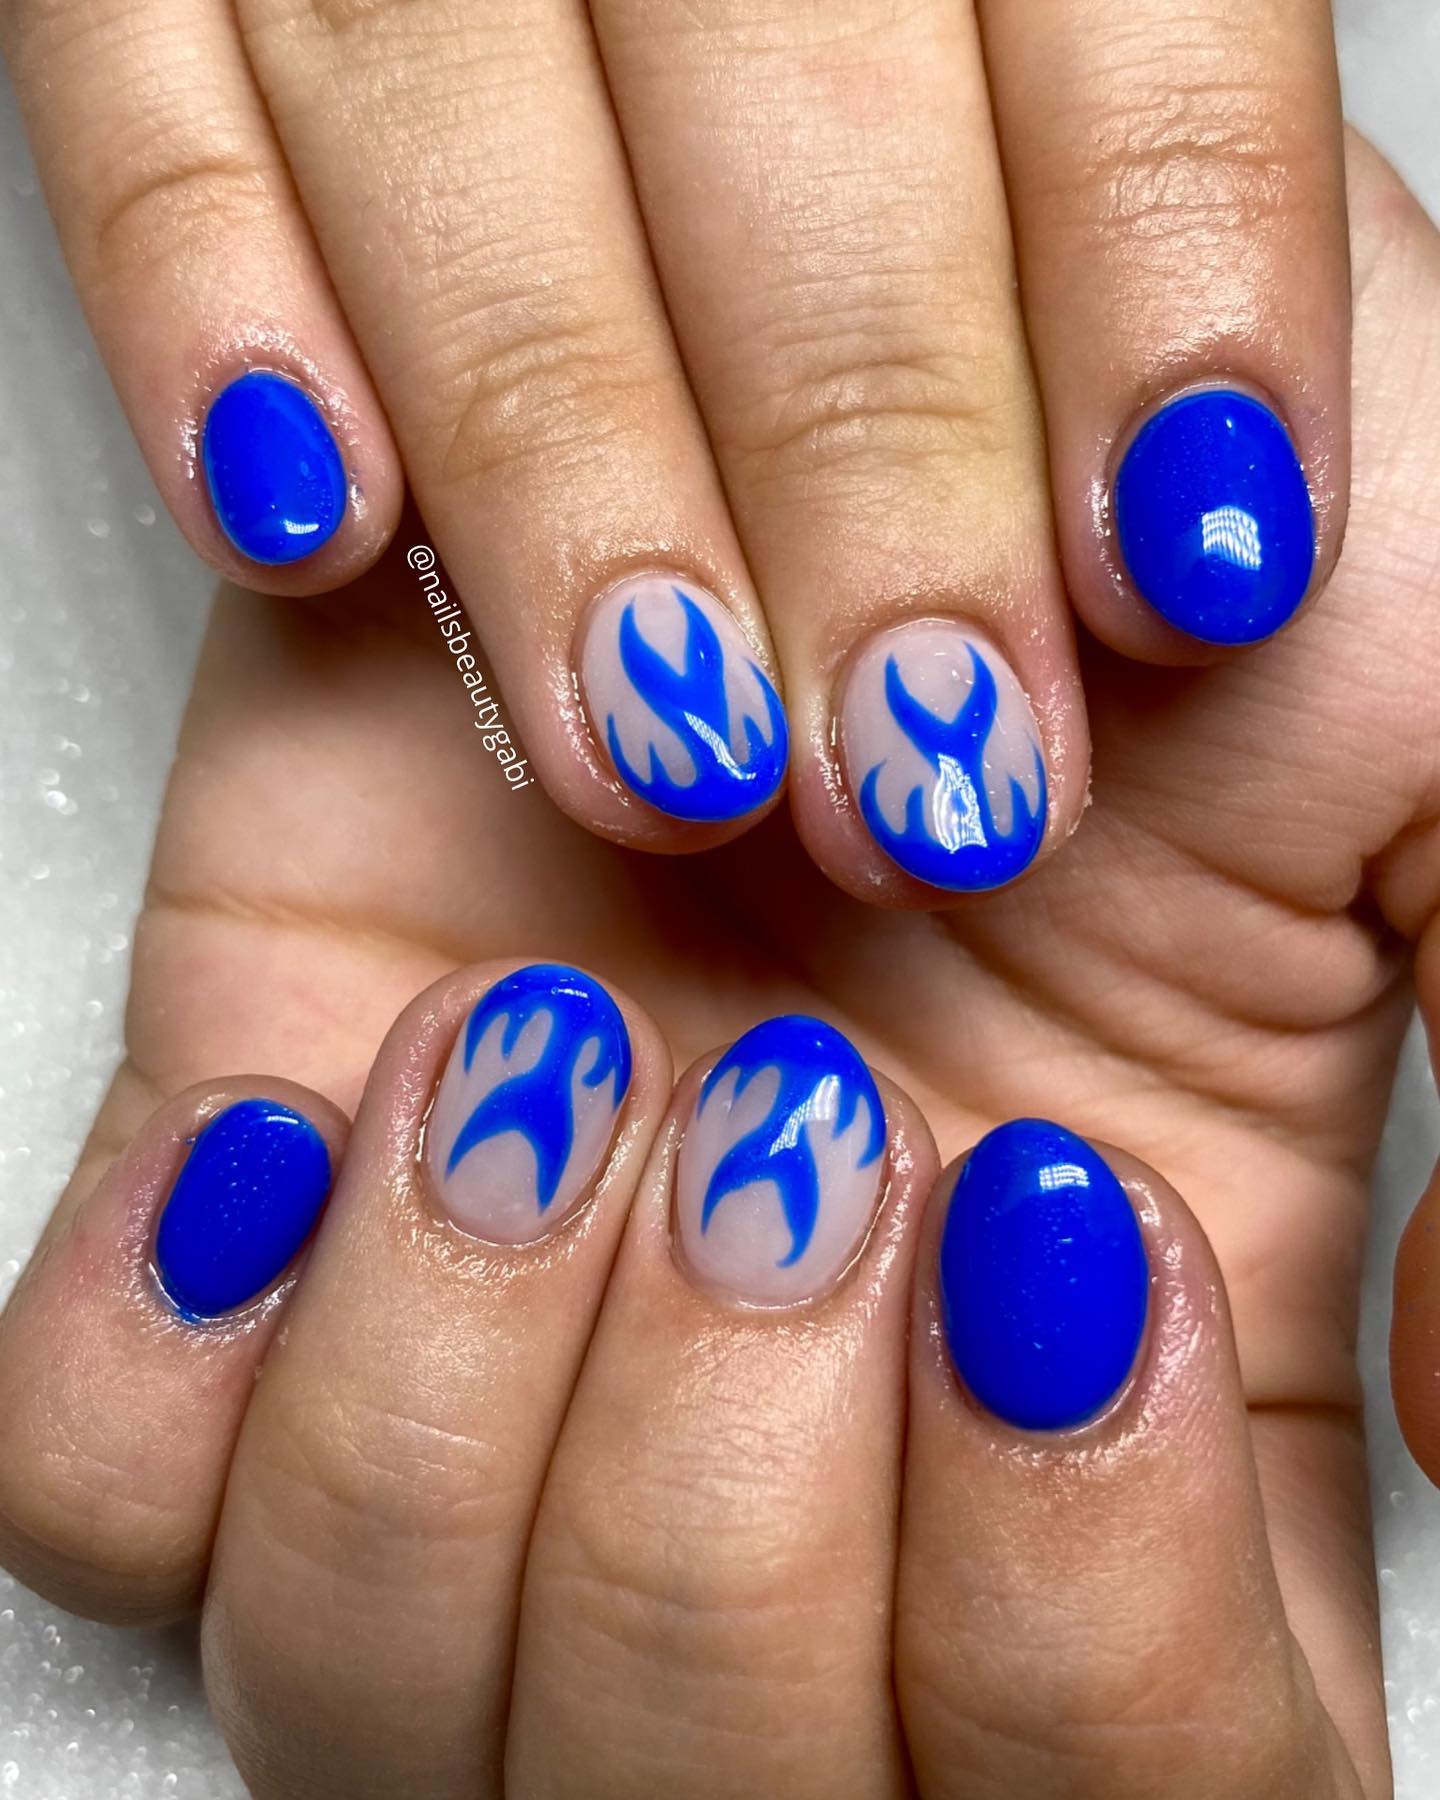 This shade of blue is absolutely amazing! The flame effects used in accent nails reminds of sea waves, so the color is quite matching with this nail art. Let's give it a shot to get the feeling of blue tranquility.